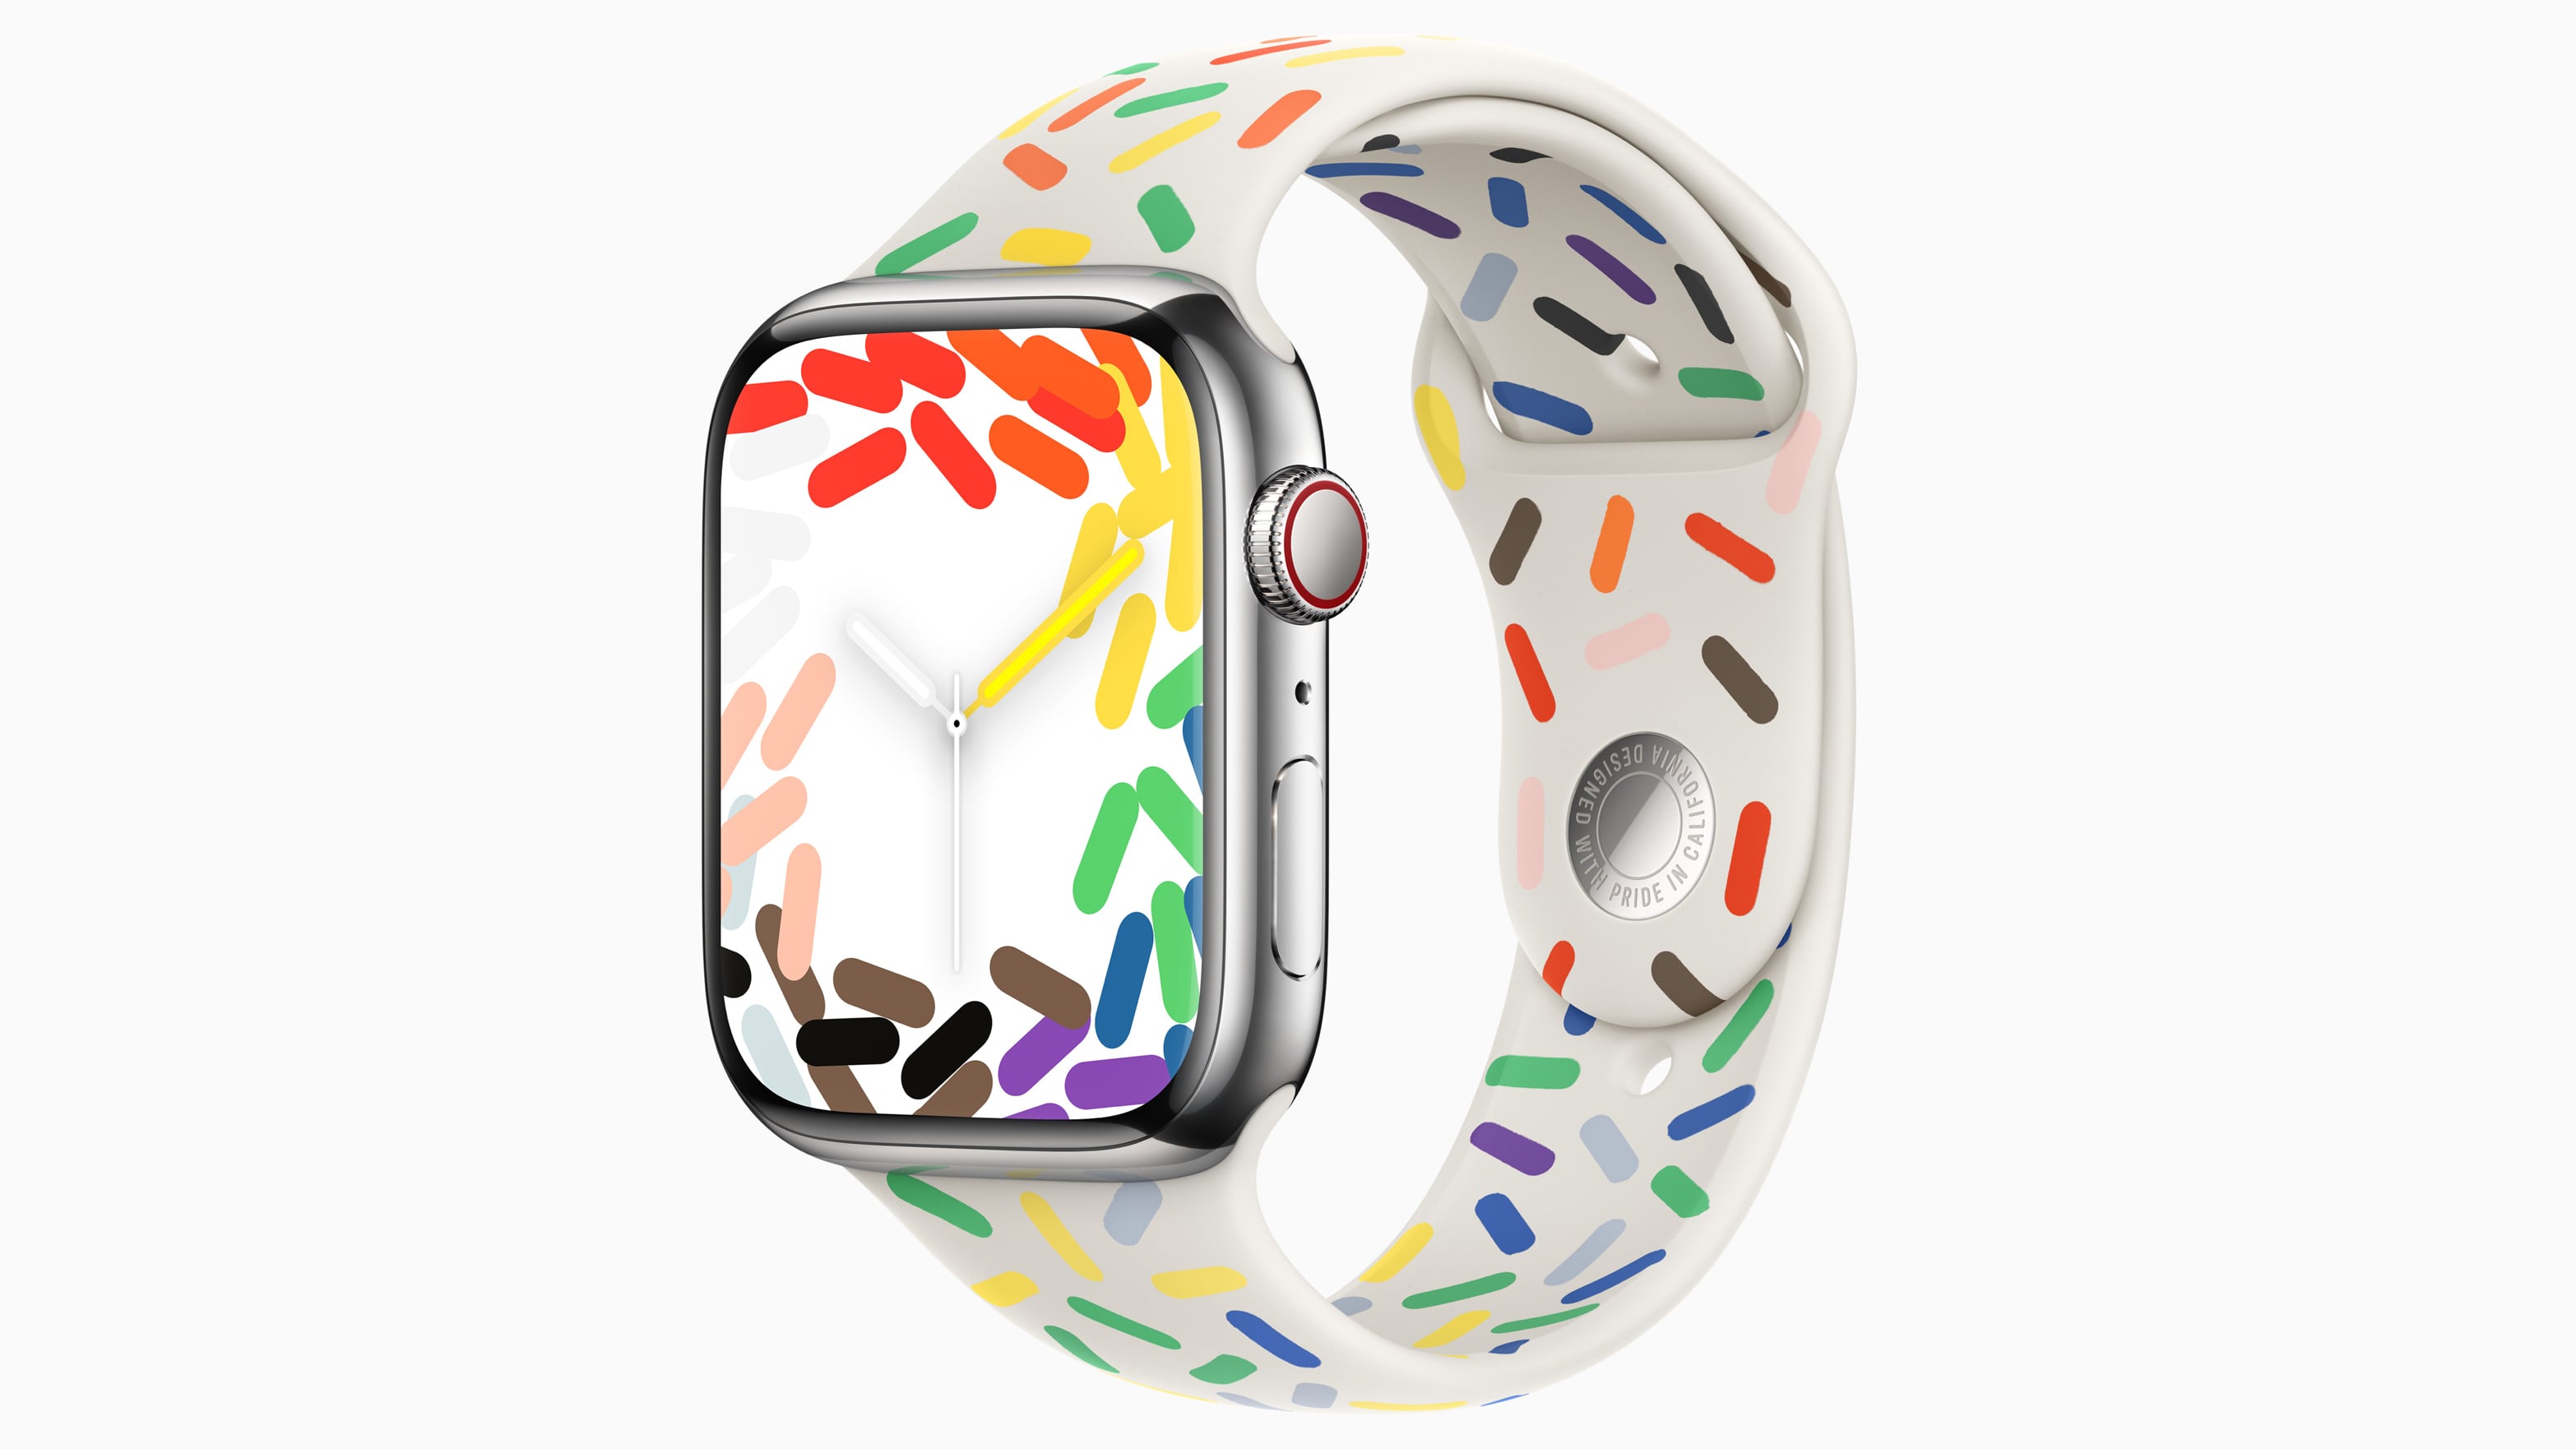 The Pride Edition 2023 watch face and band for Apple Watch